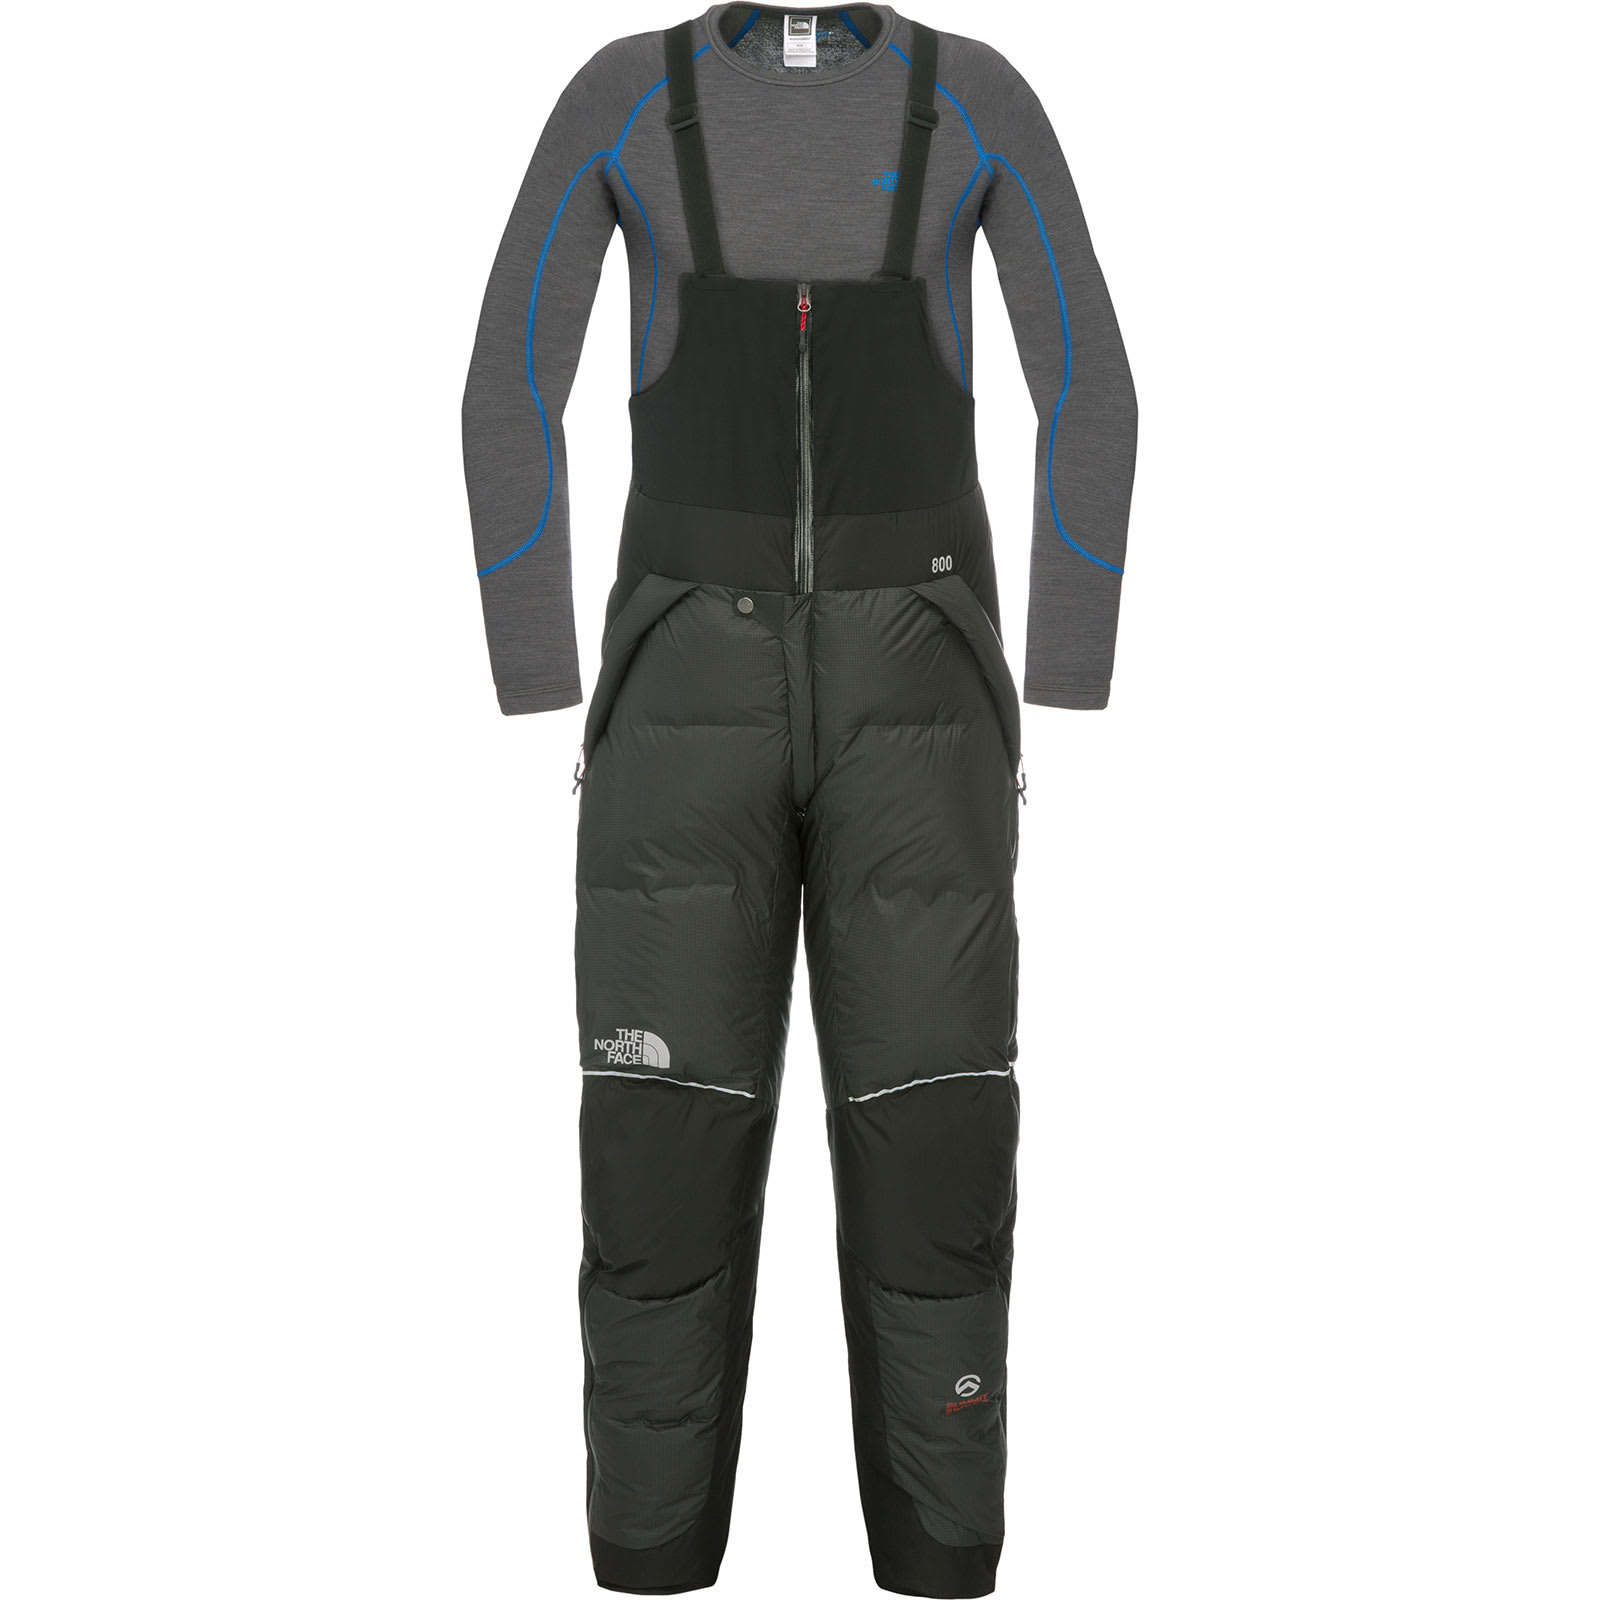 Köp The North Face Men's Himalayan Pant hos Outnorth